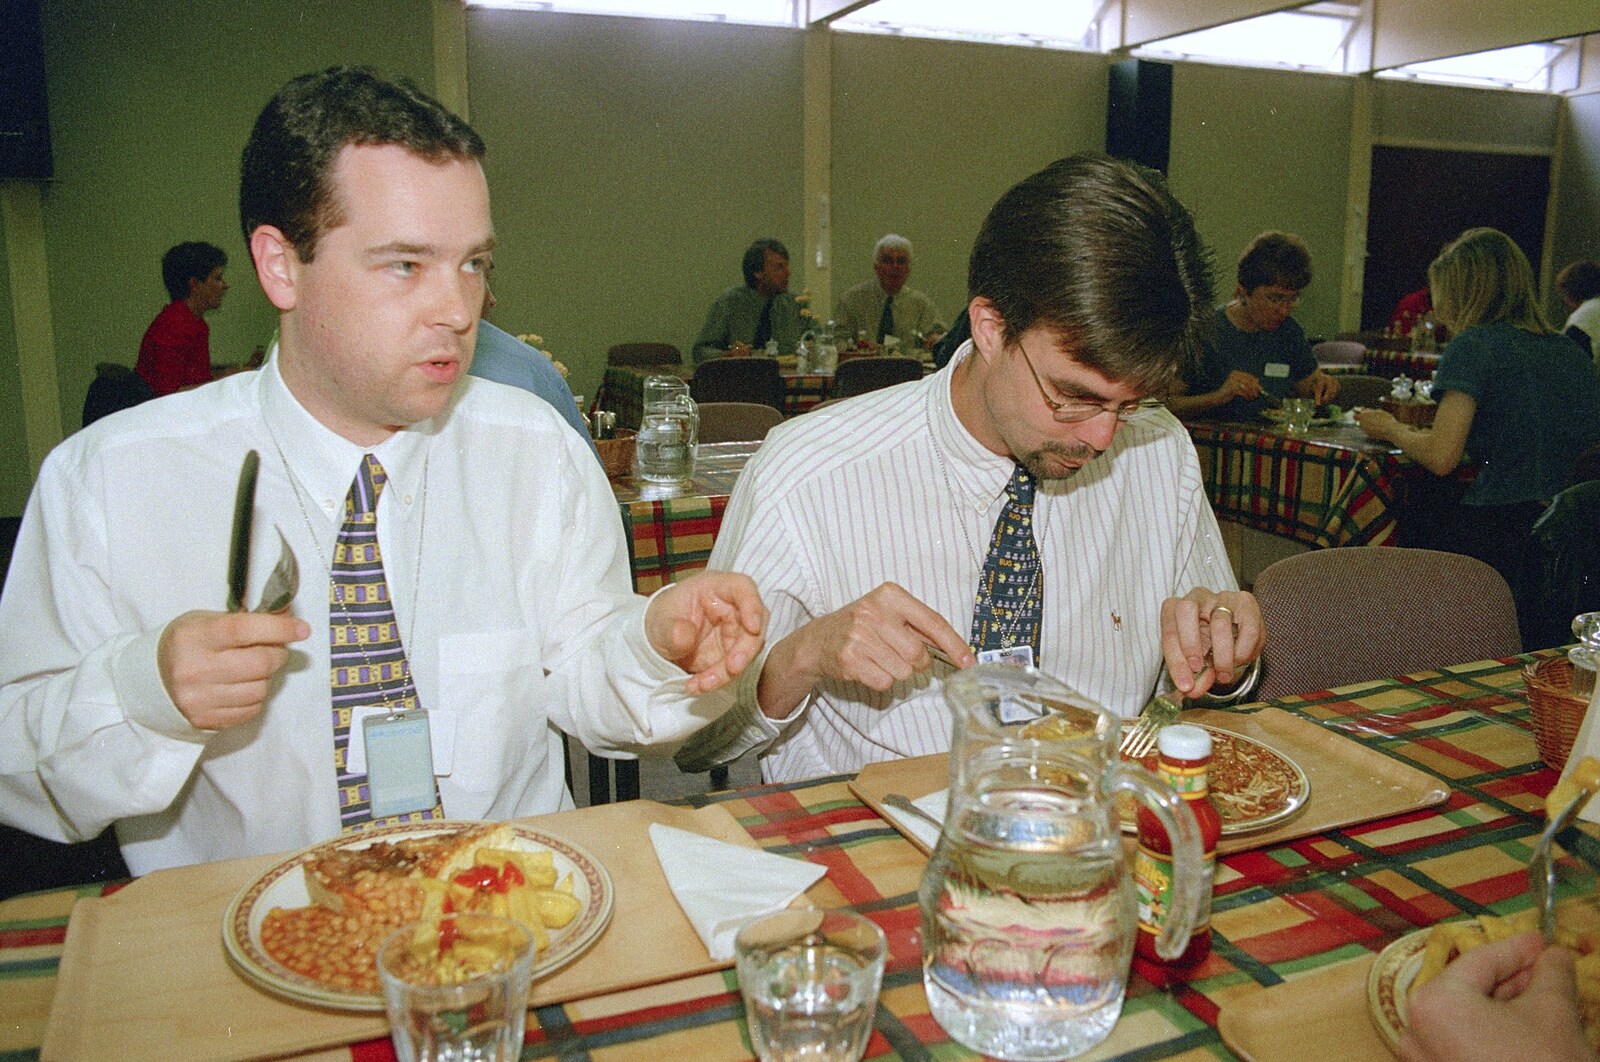 A Last Few Days at CISU, Suffolk County Council, Ipswich - 11th June 2000: Russell and Dan eat their lunch